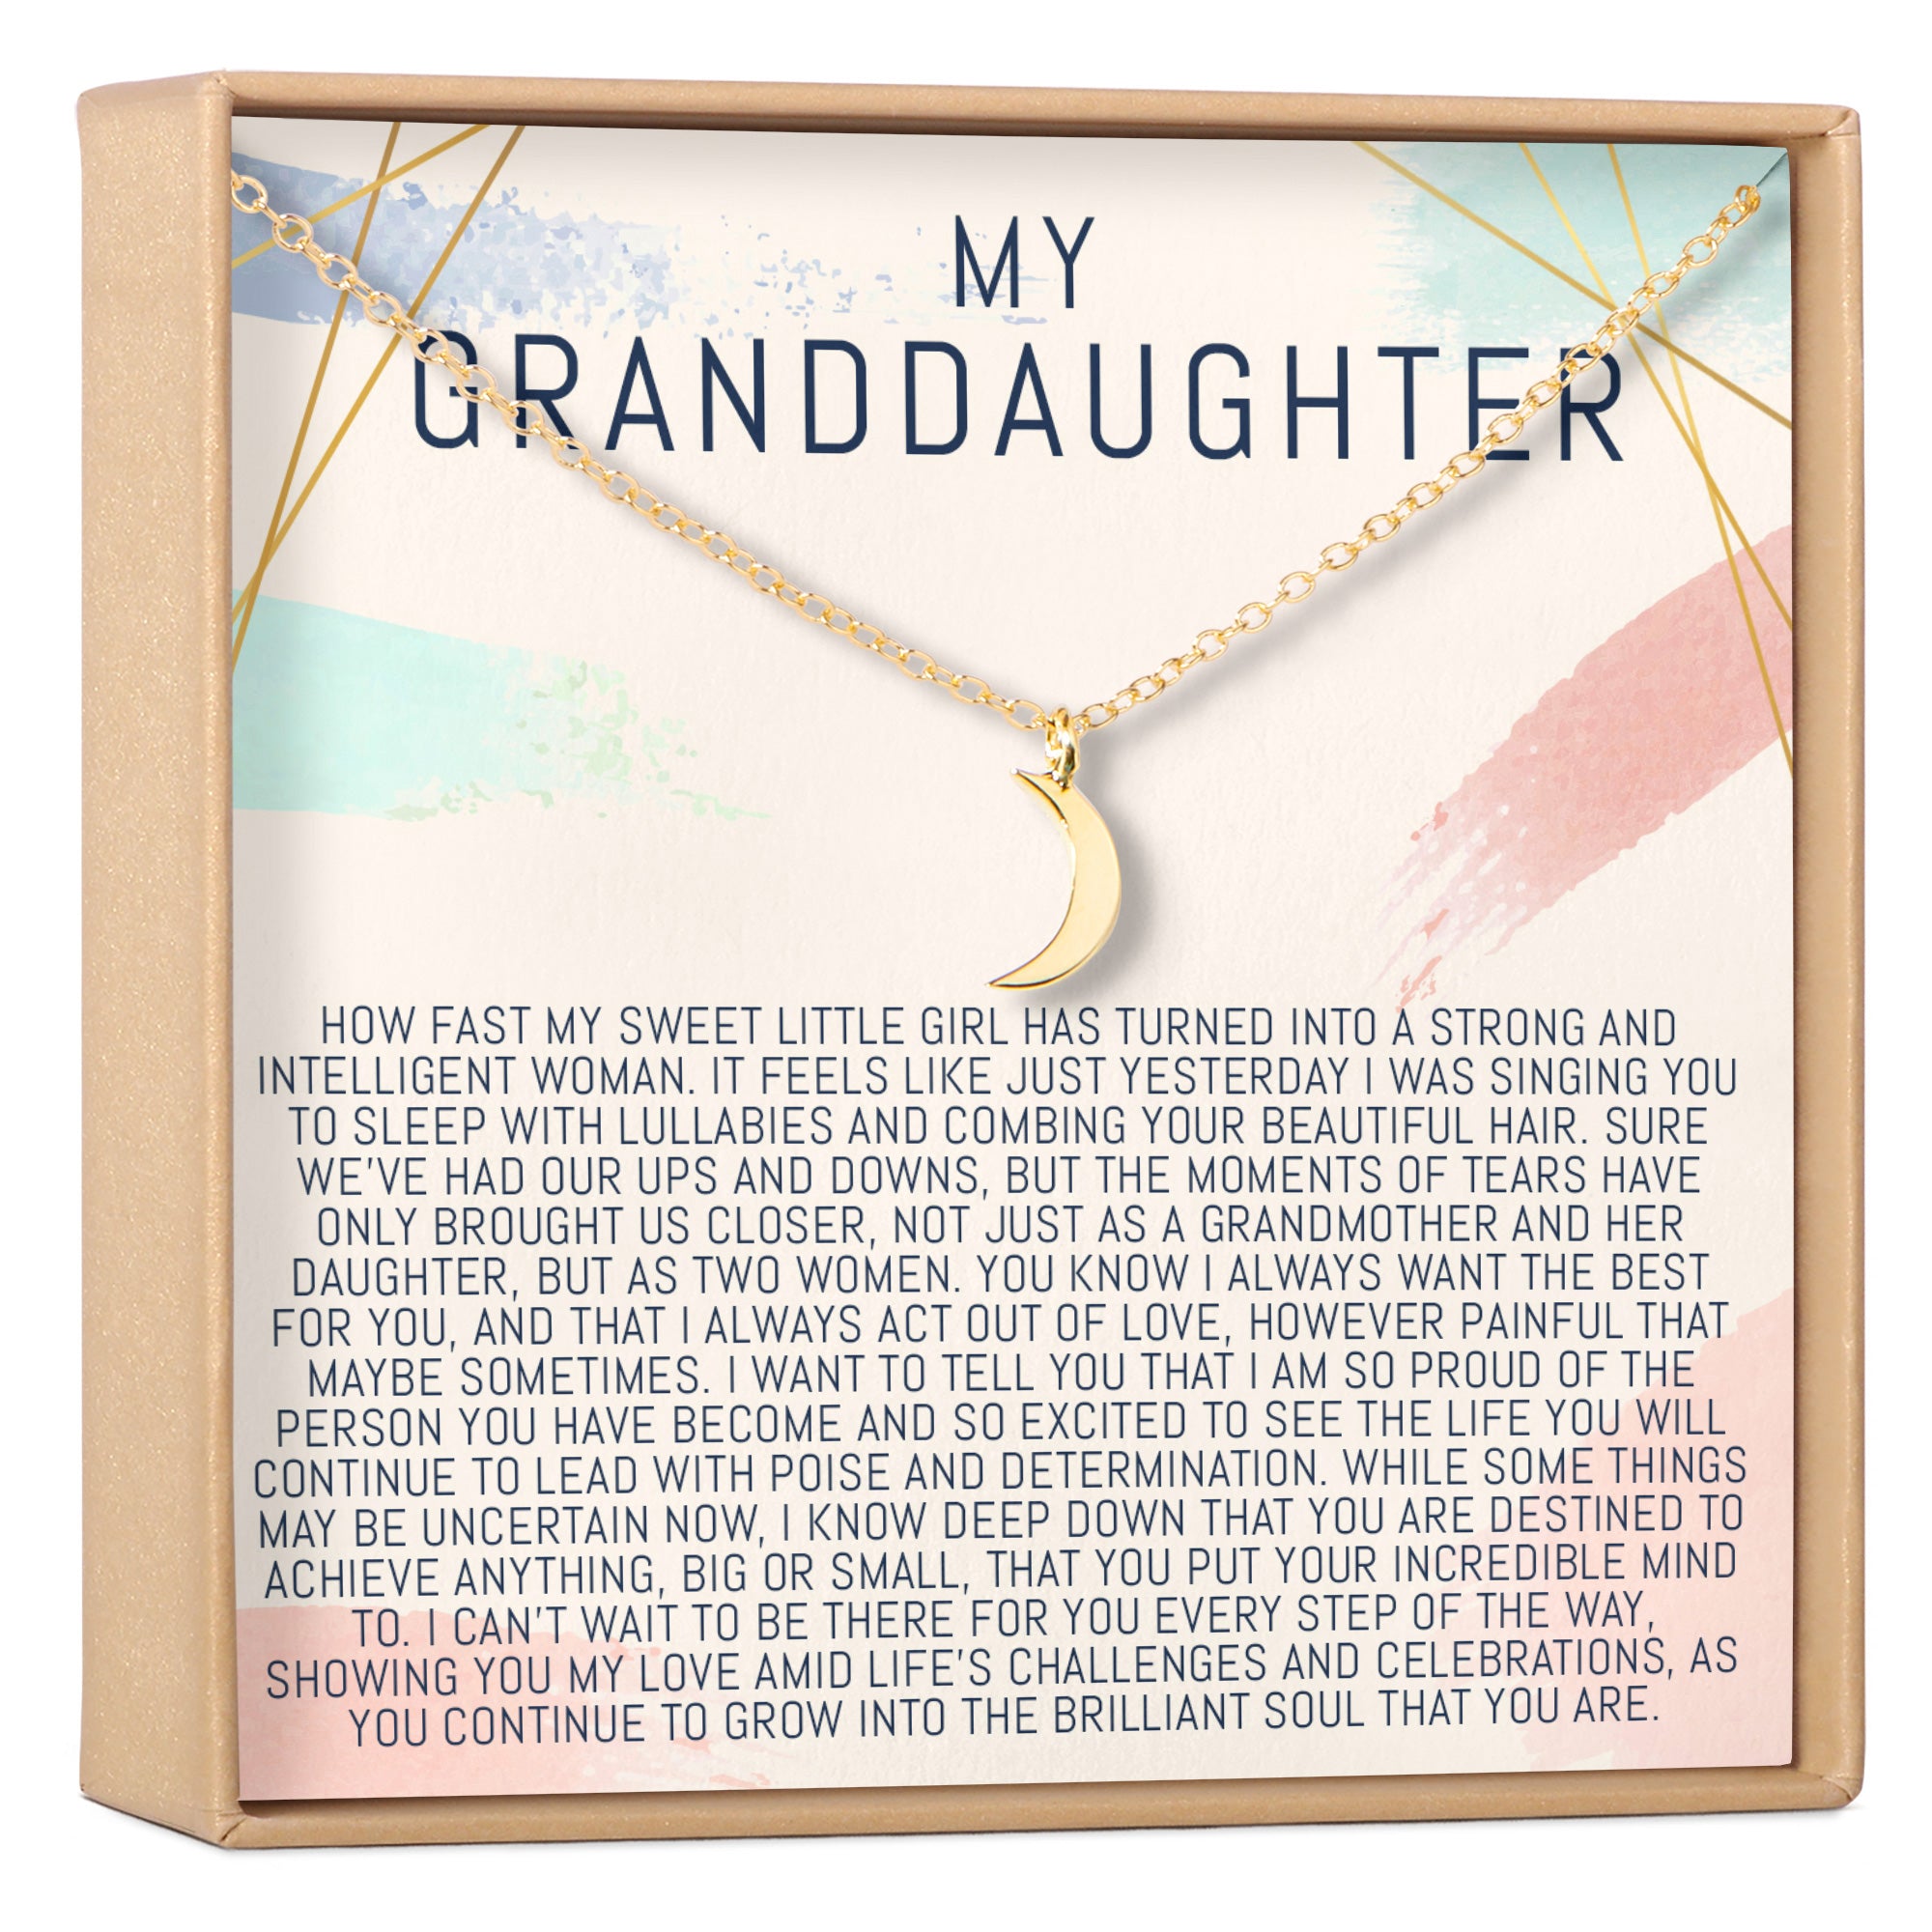 Your Heroes, My Grandparents: A Granddaughter's Love